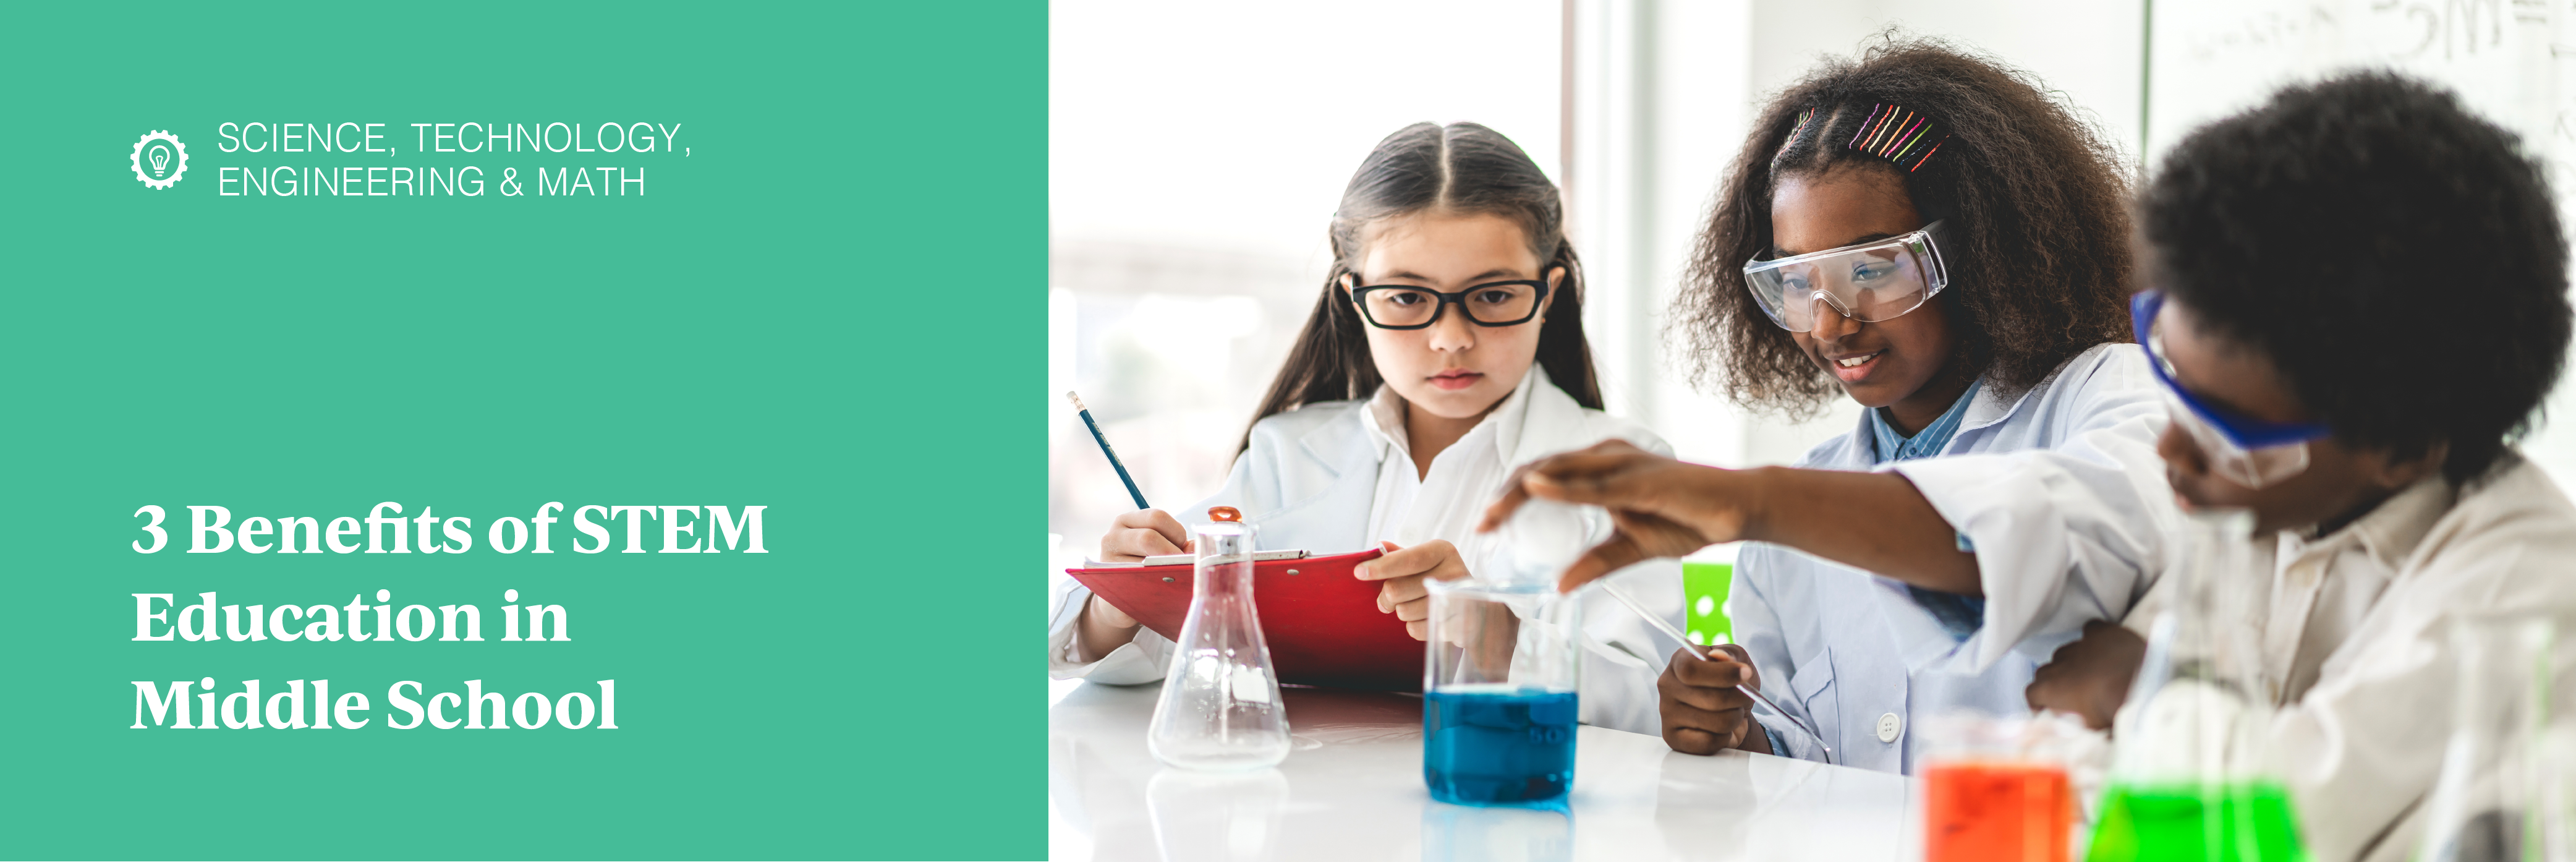 3 Benefits of STEM Education in Middle School